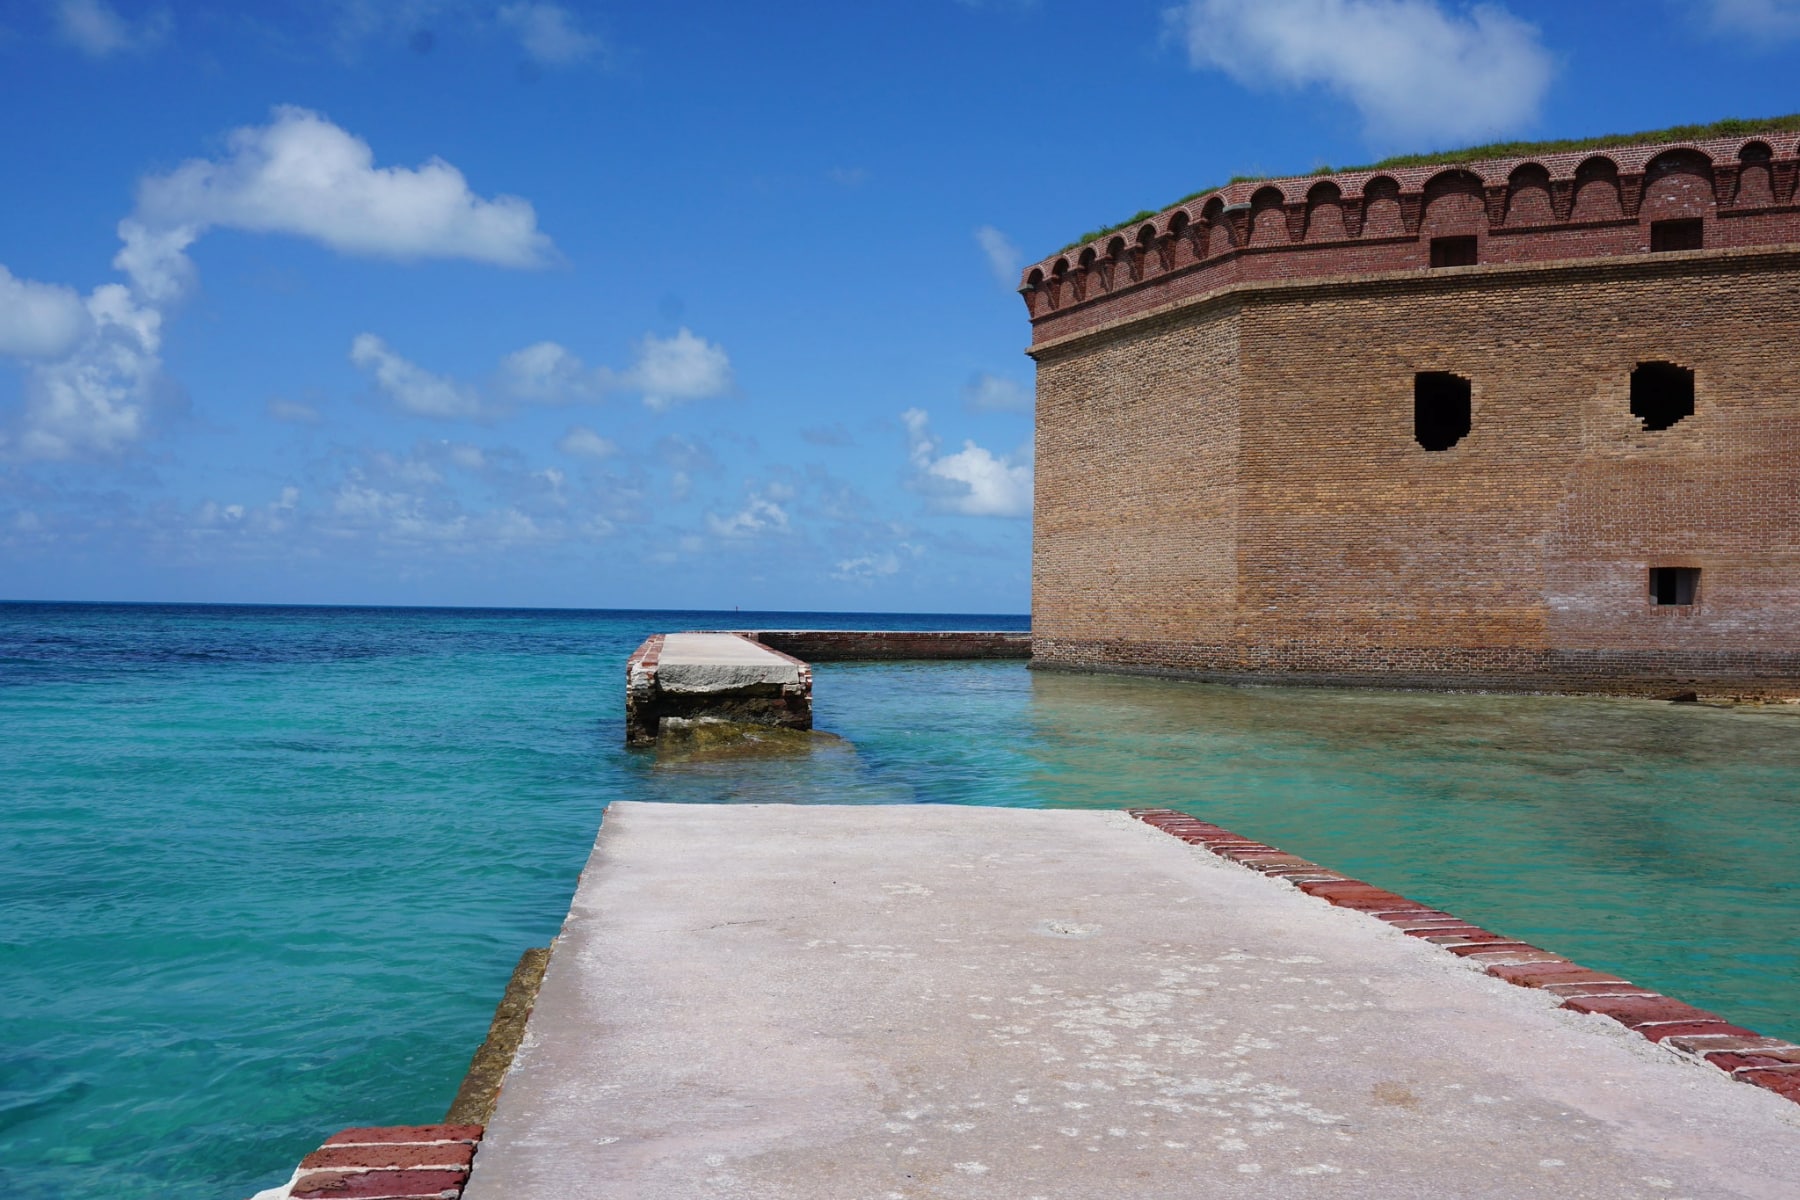 Moat wall in Dry Tortugas broken by Hurricane Irma in 2017.